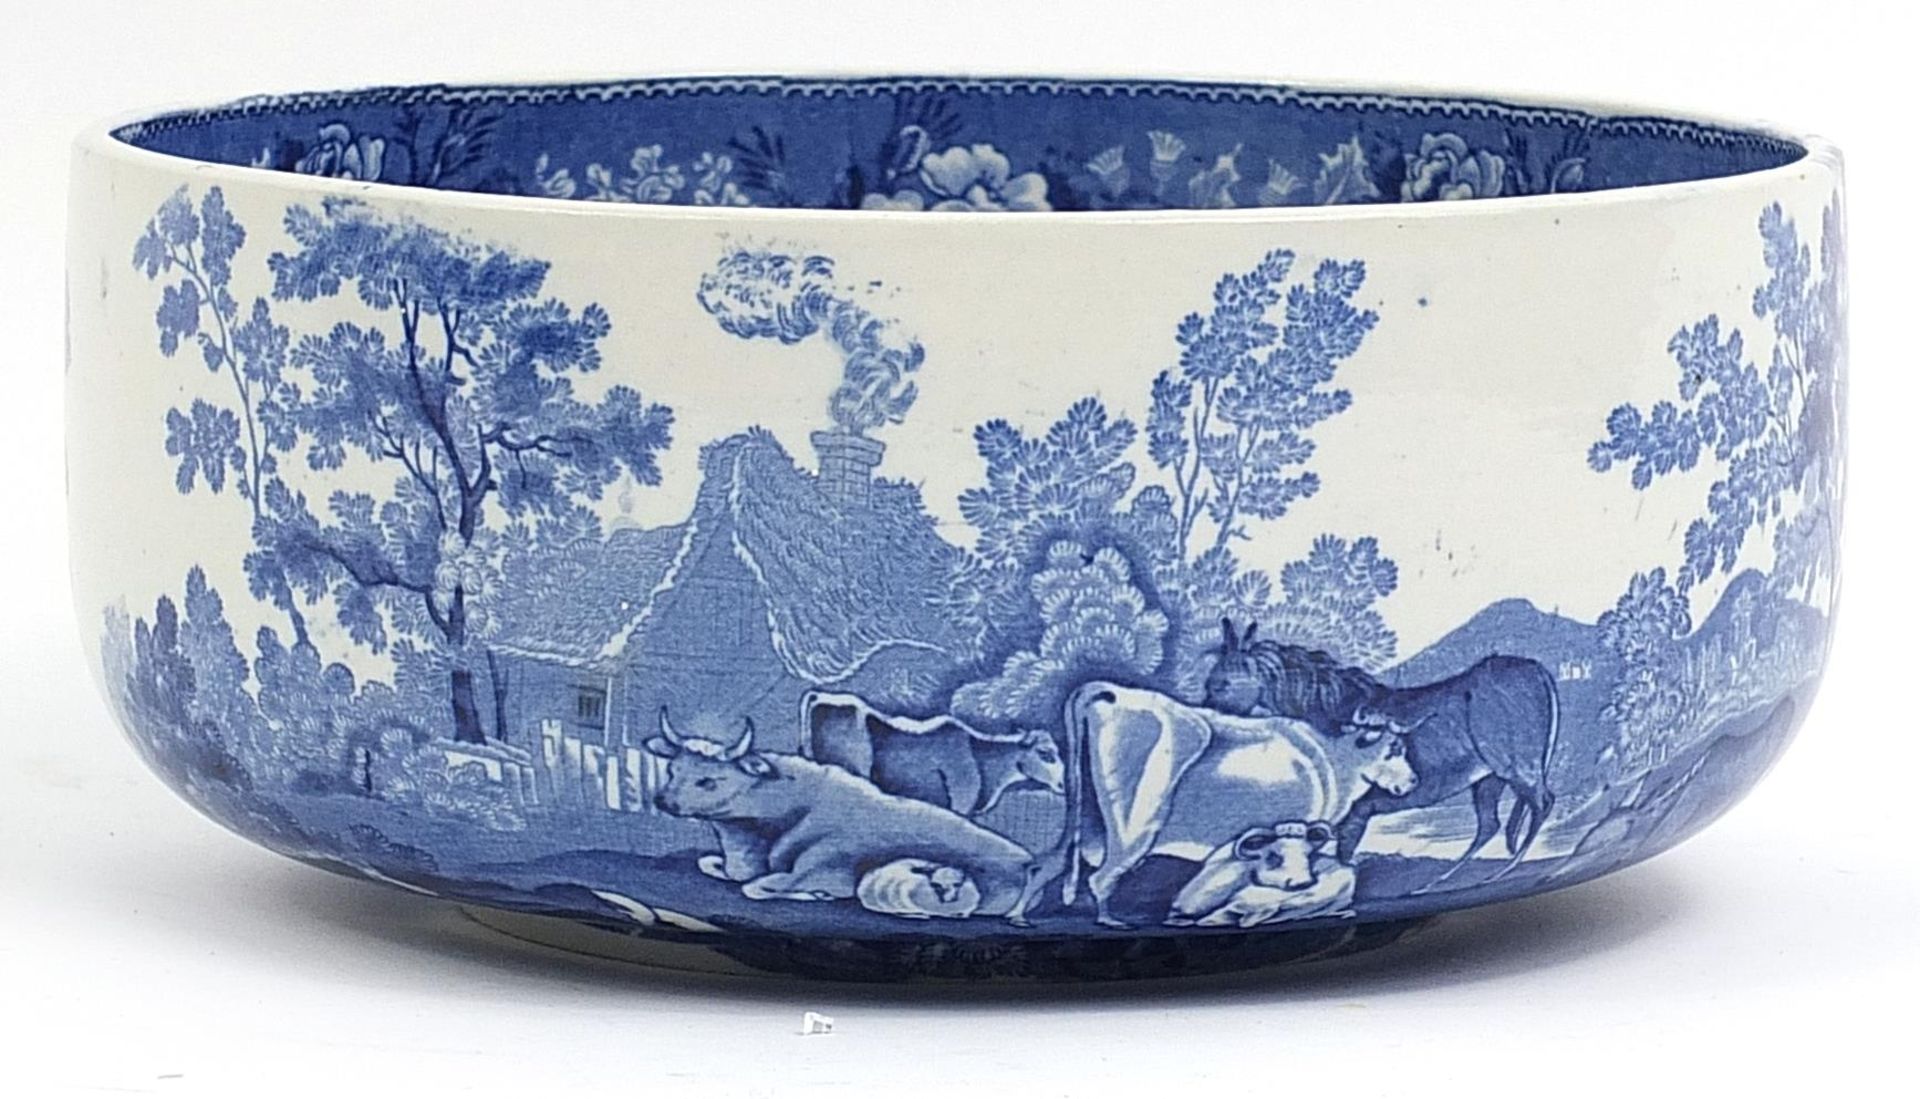 Adams pottery blue and white willow pattern fruit bowl, 24cm in diameter